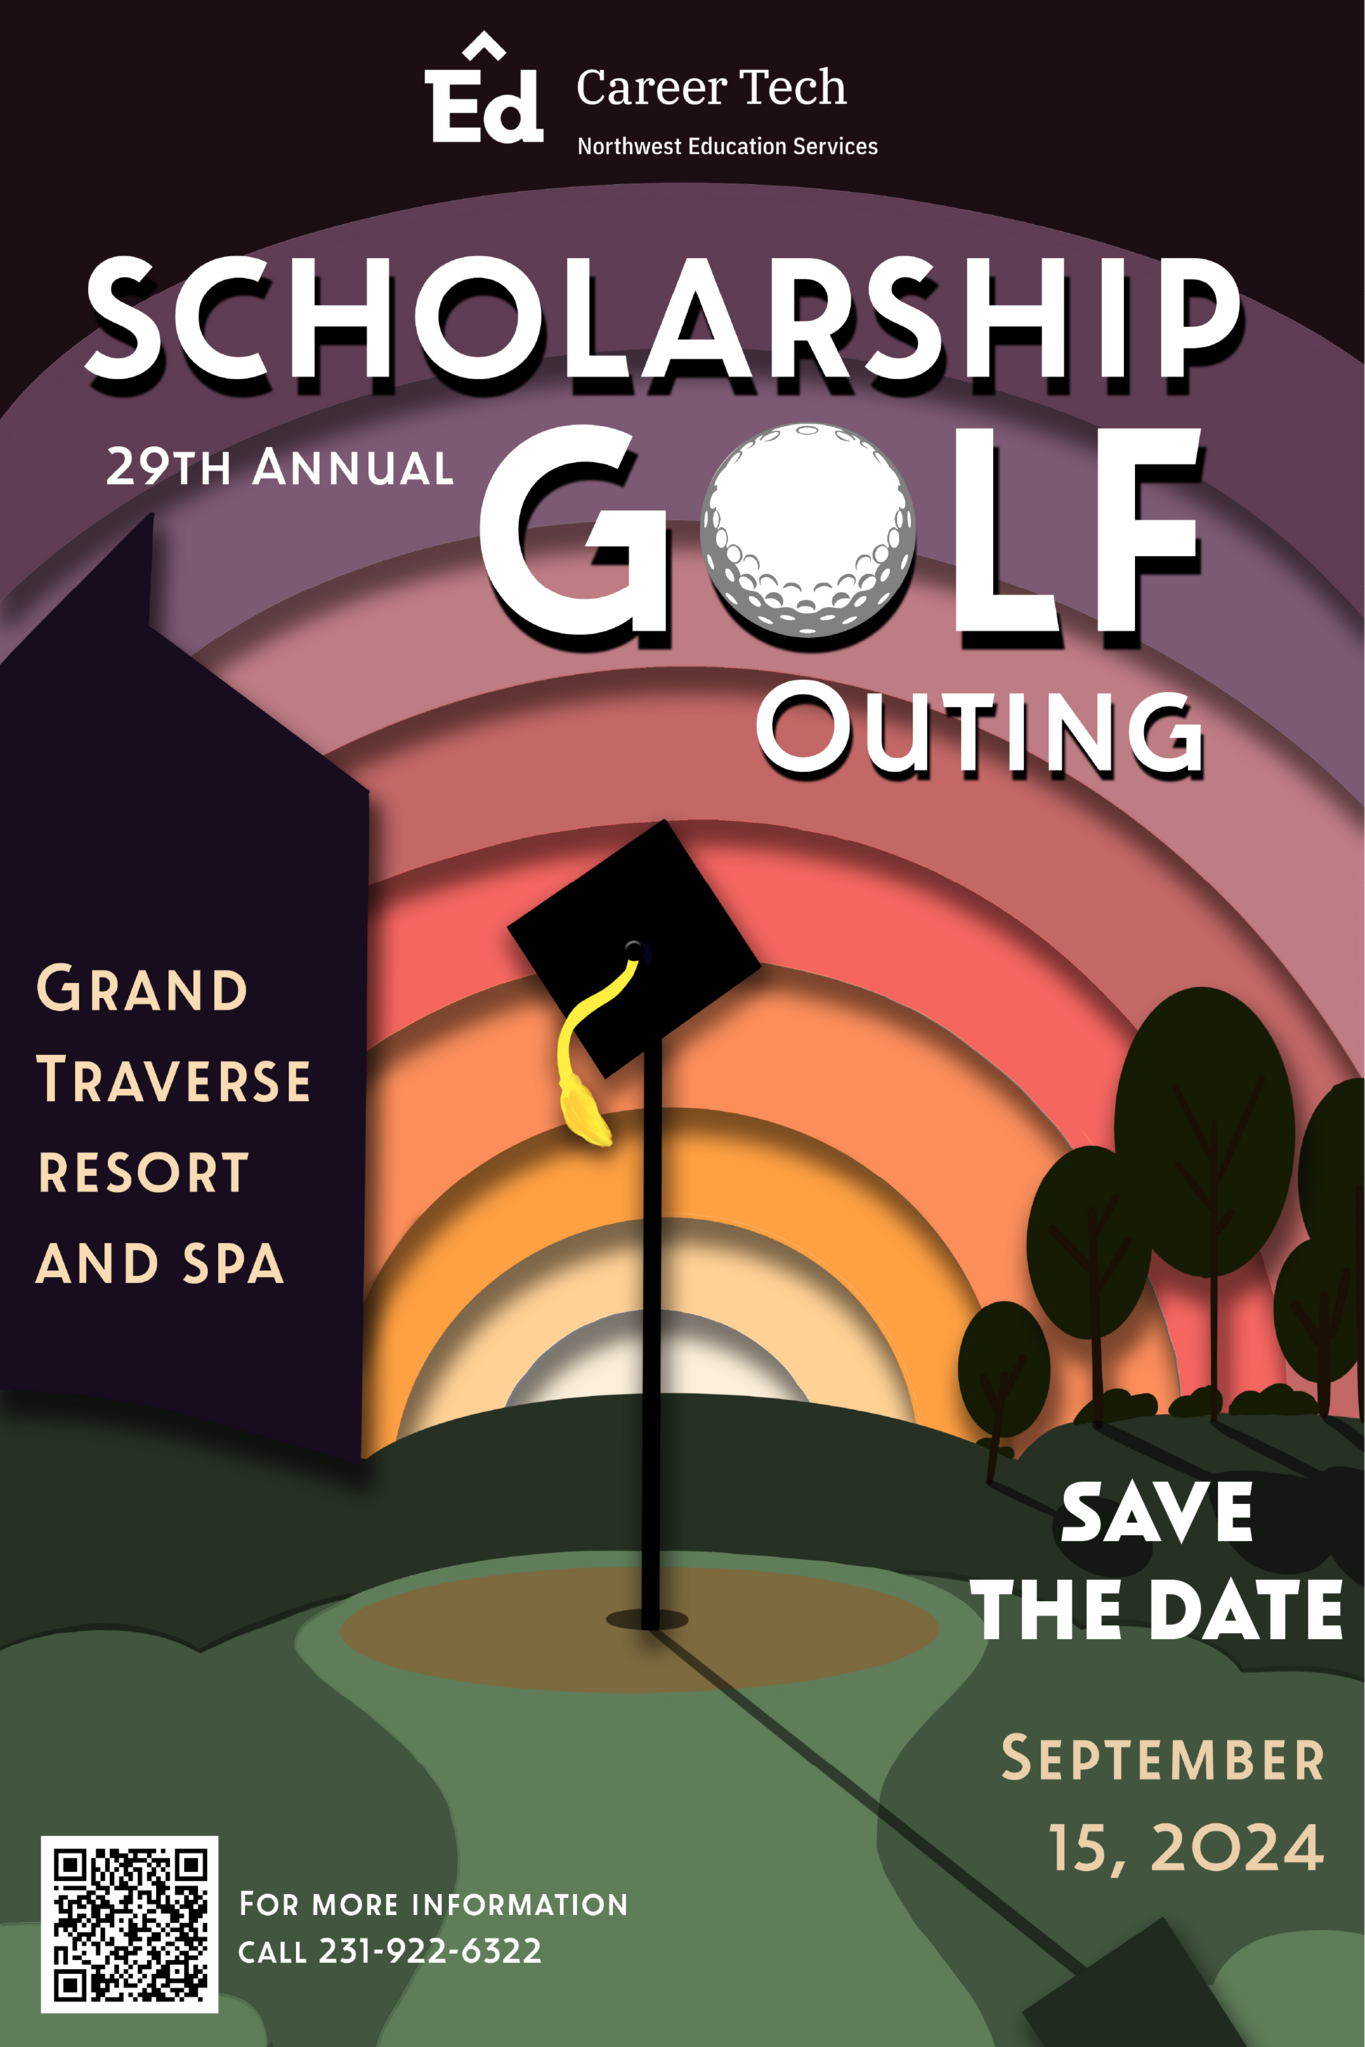 Scholarship Golf Outing is September 15, 2024